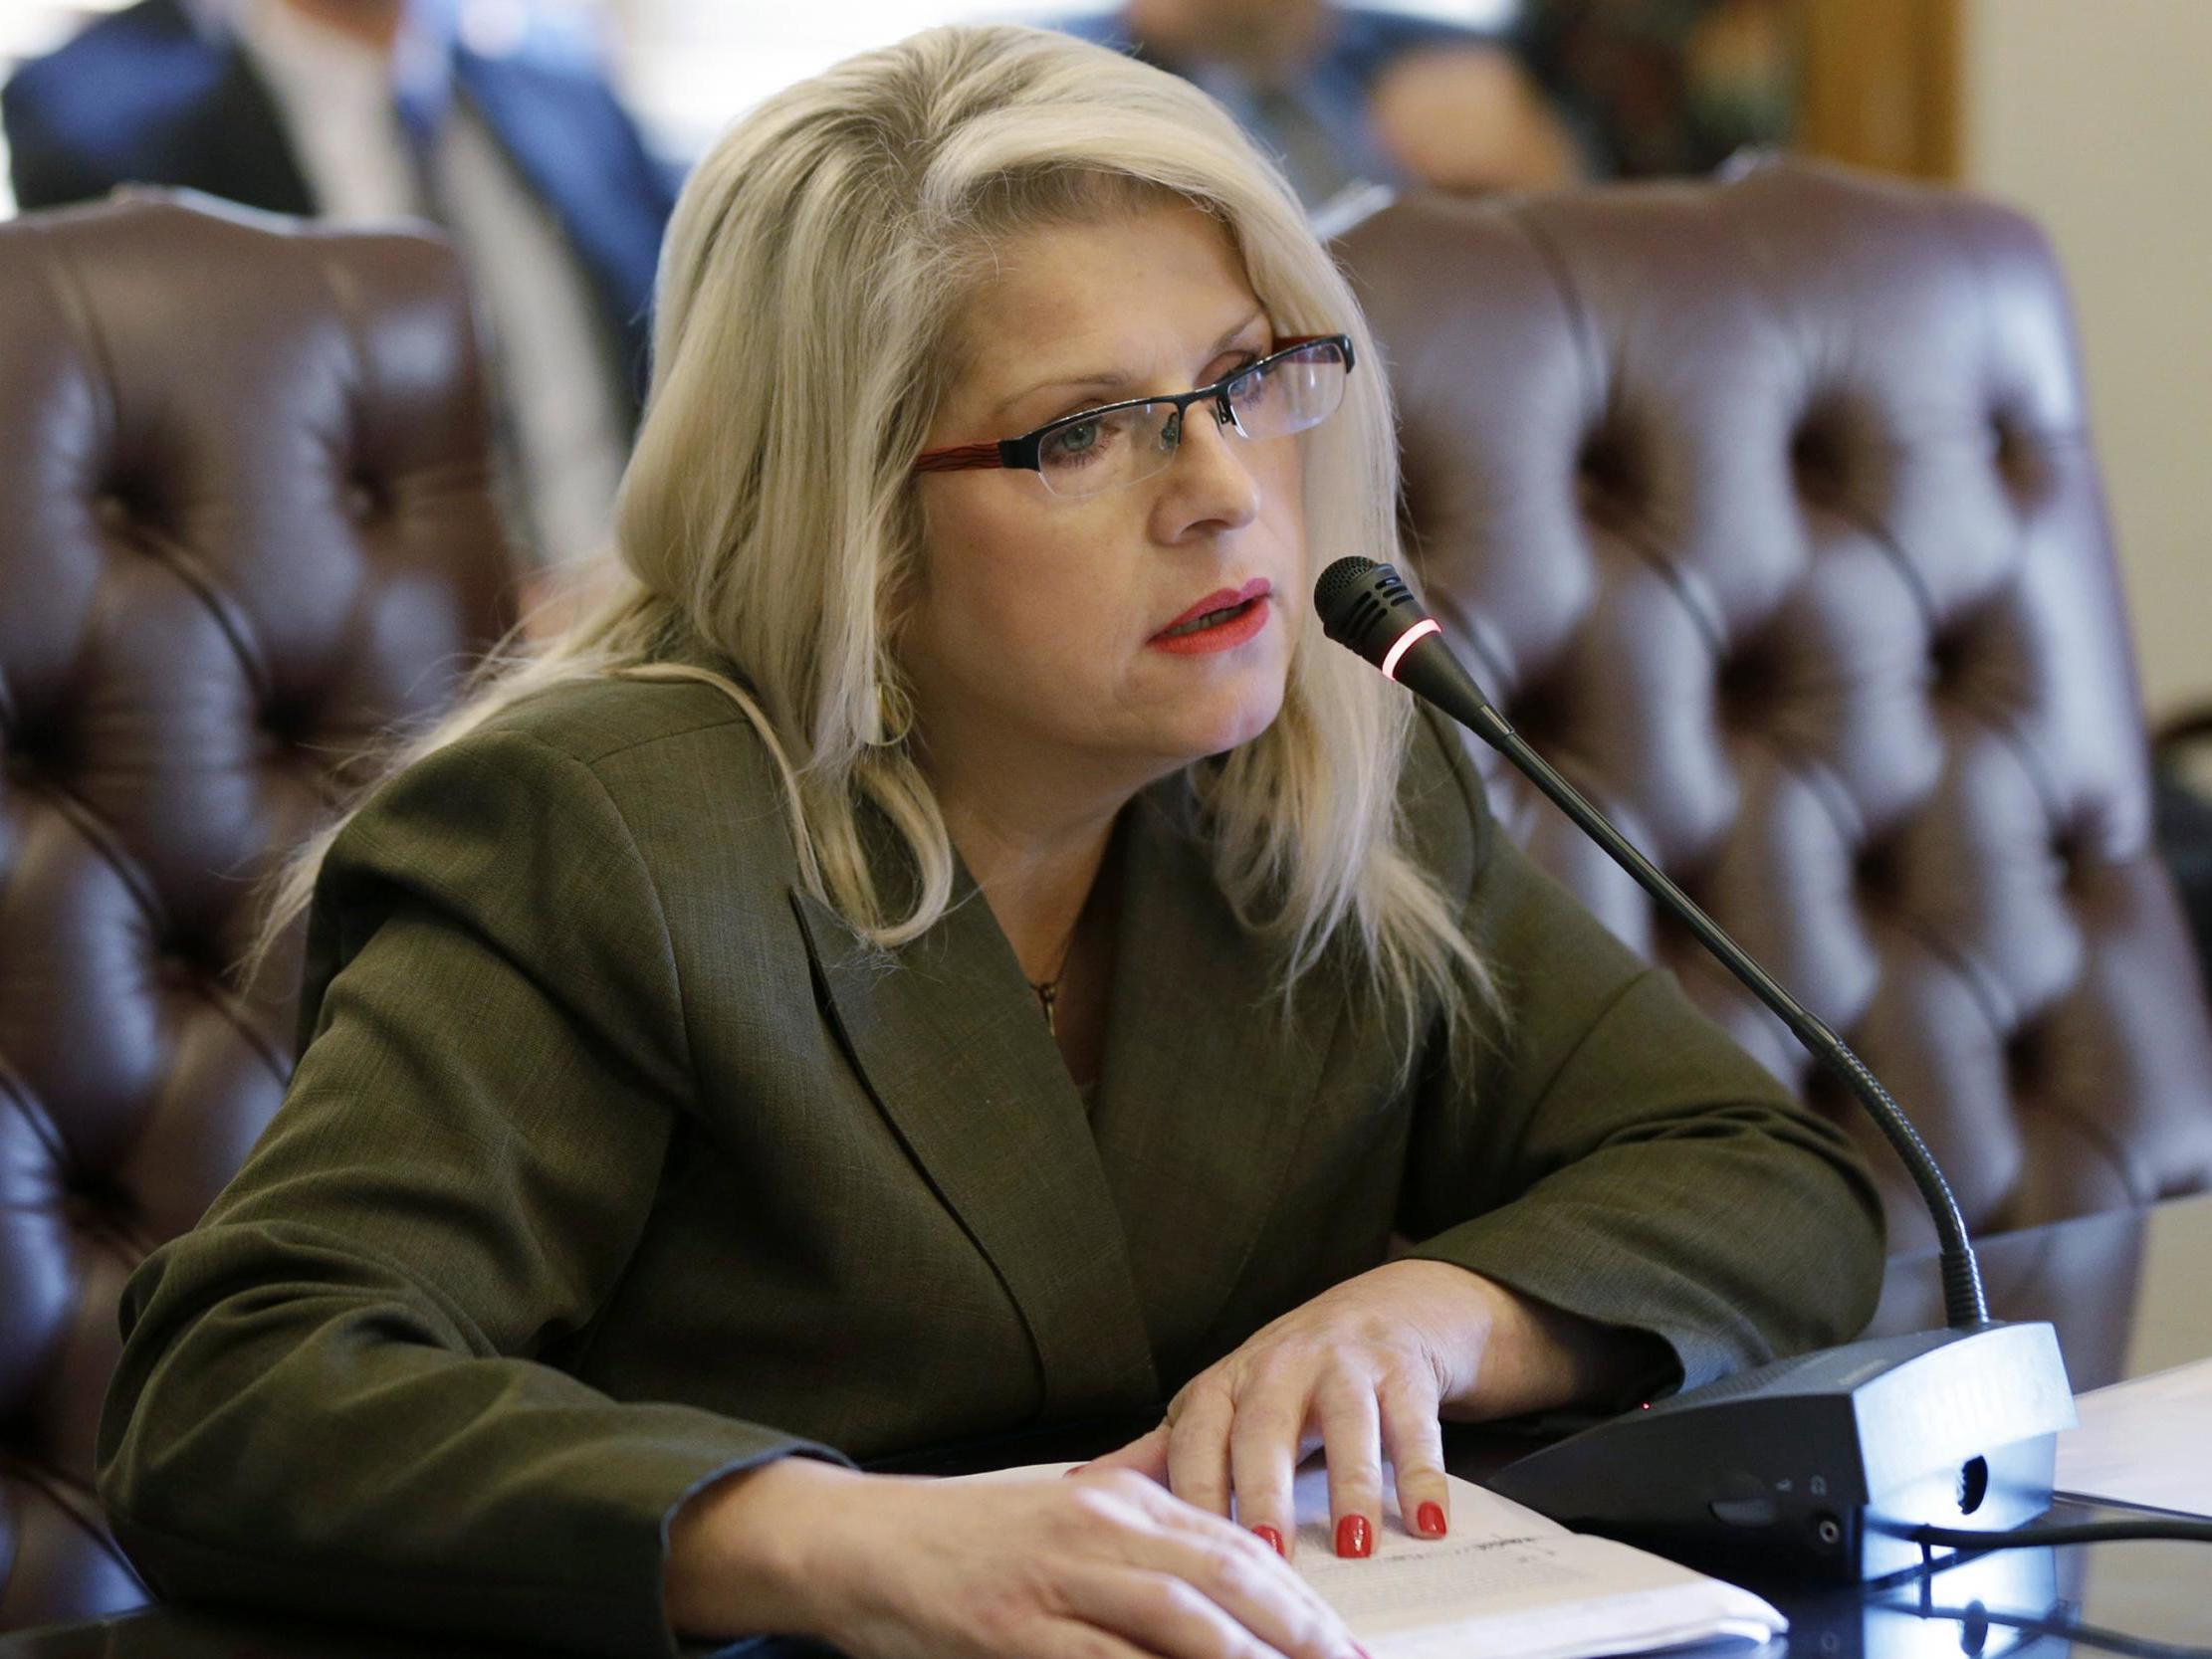 Former Arkansas State Senator Linda Collins-Smith was found dead in her home earlier this month after an apparent homicide